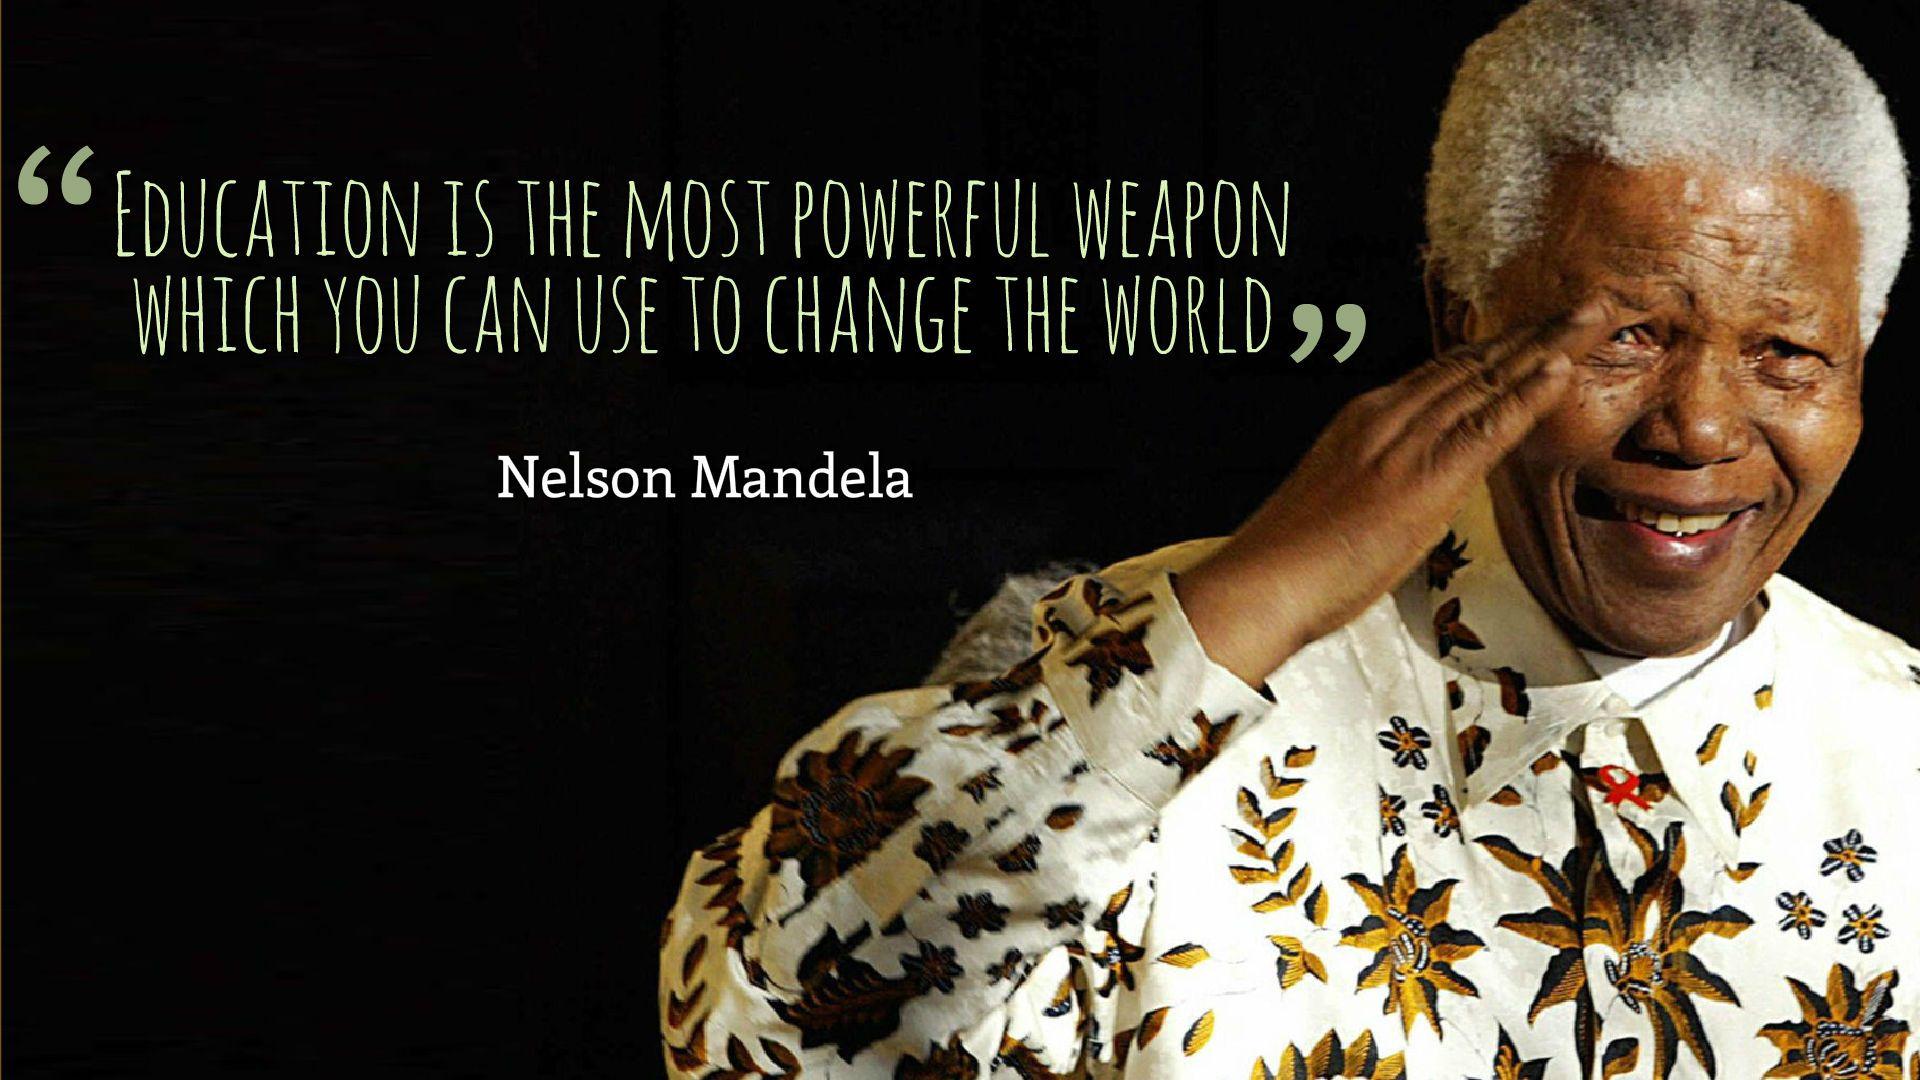 Nelson Mandela Education Most Powerful Weapon Quotes Wallpaper